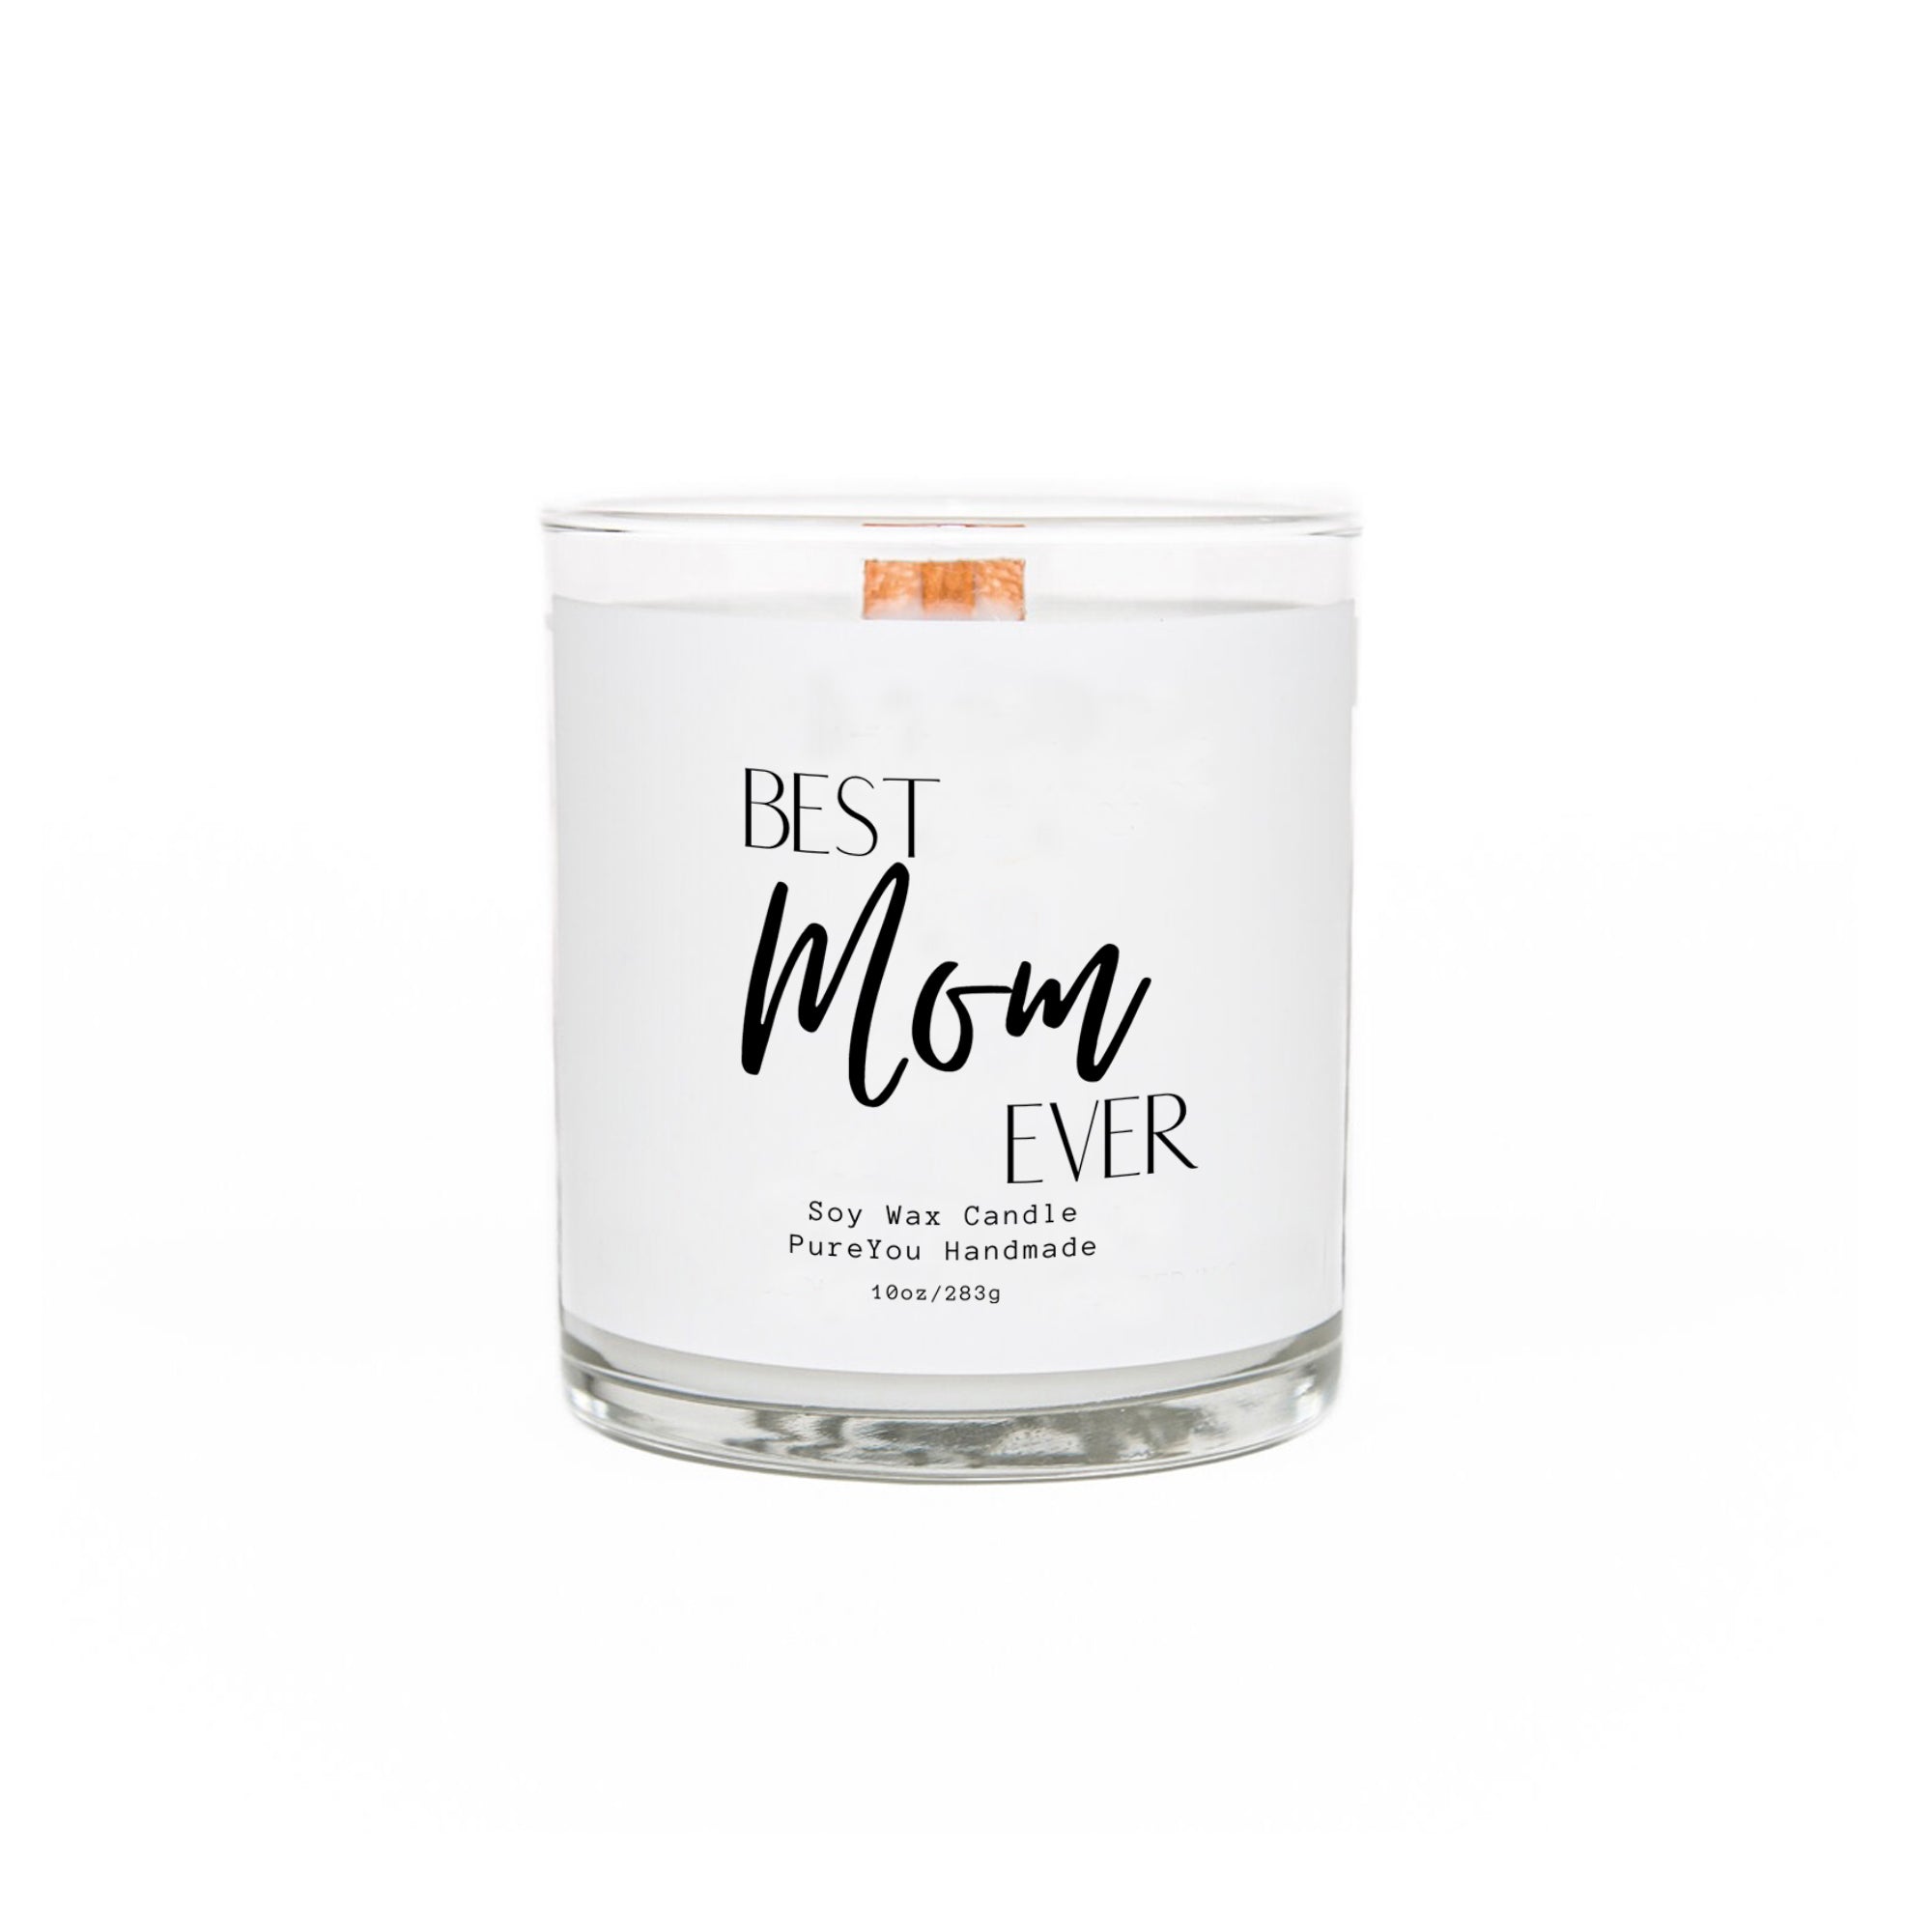 “Best Mom Ever” Soy Wax Candle